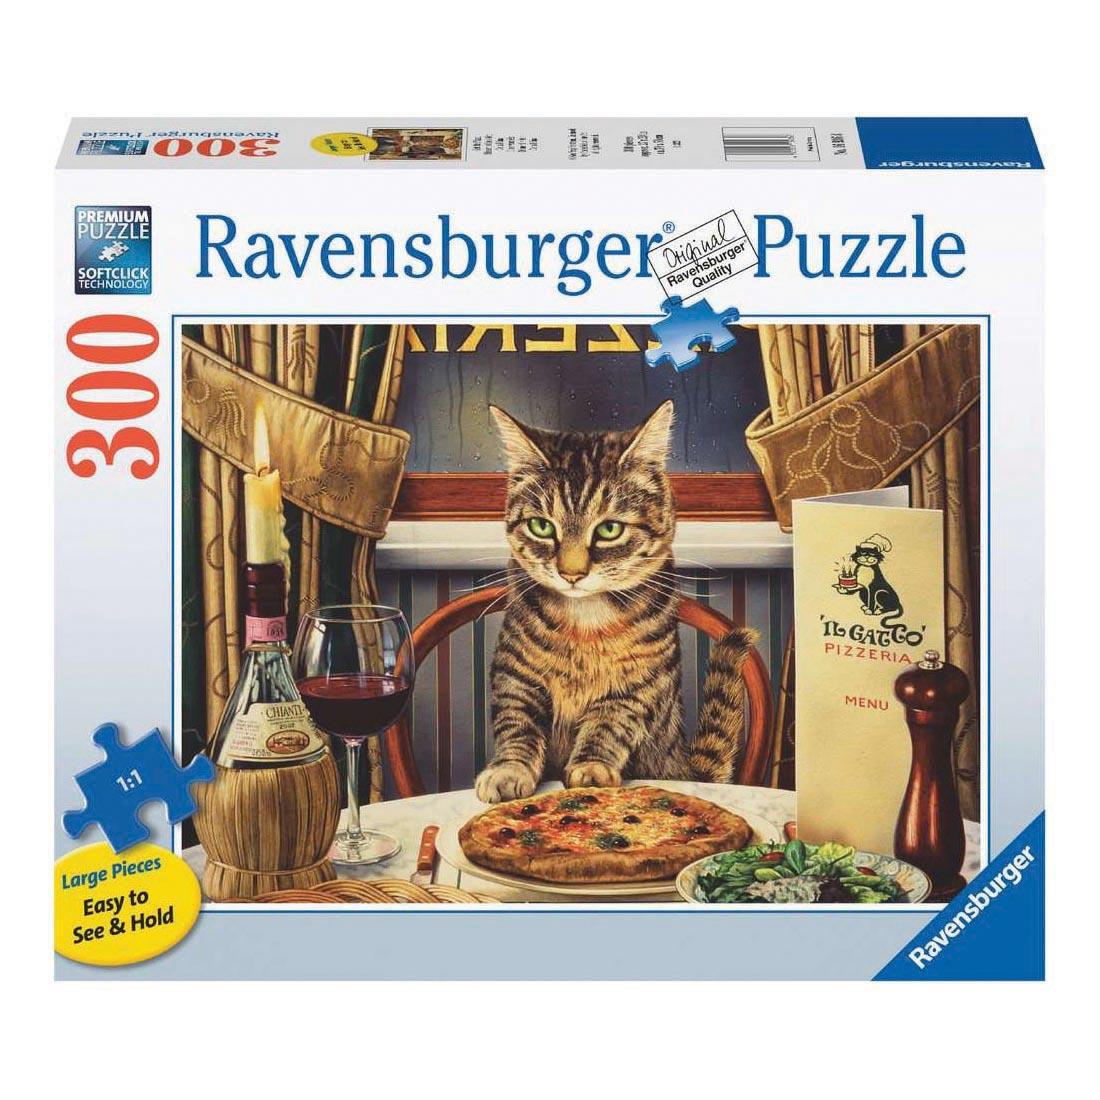 Dinner for One Large Format 300-Piece Puzzle By Ravensburger